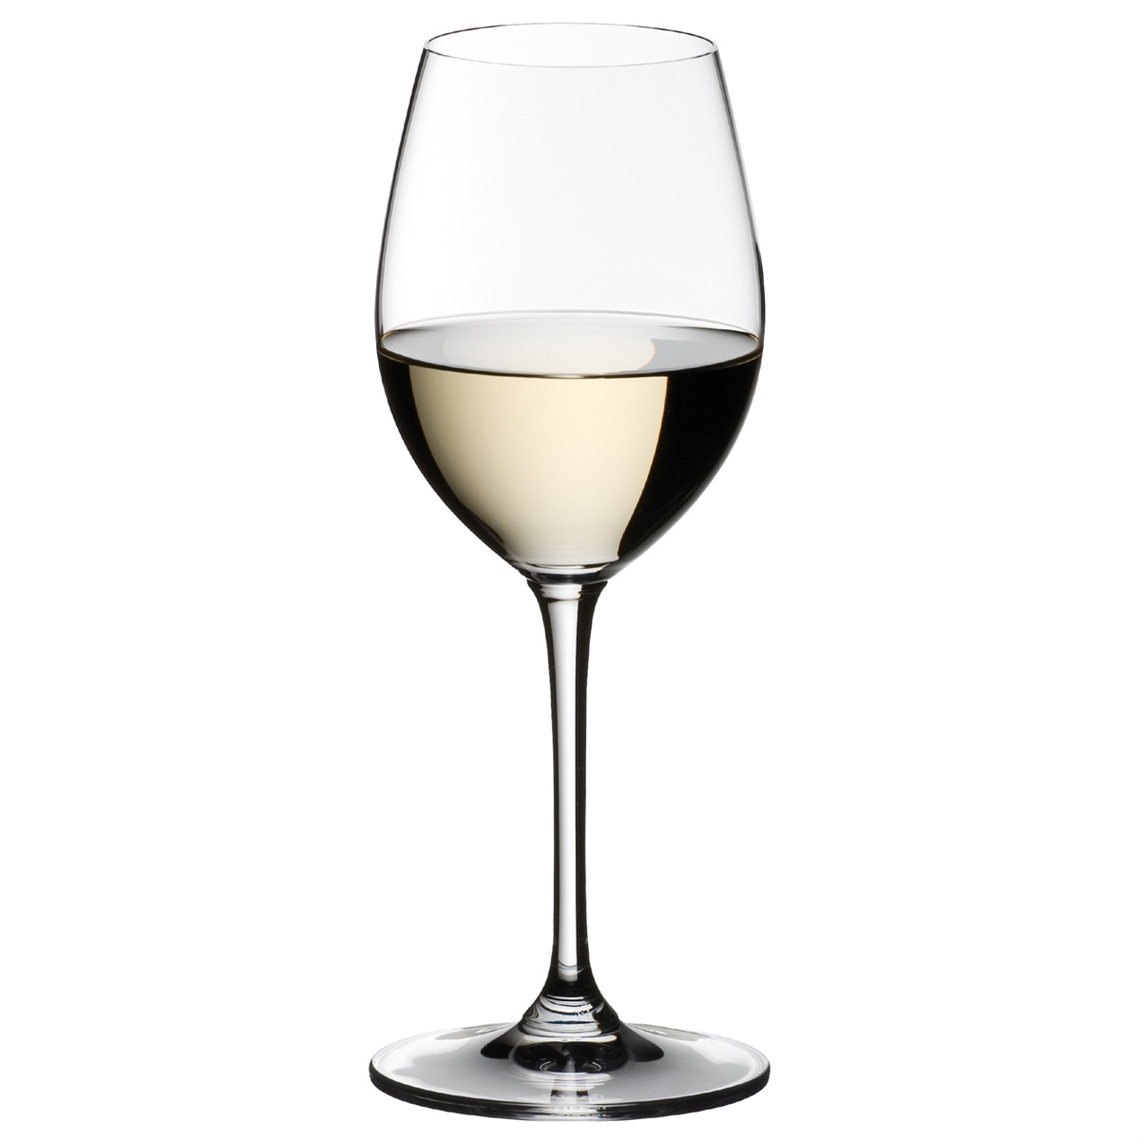 View more chablis wine glasses from our Dessert Wine Glasses range